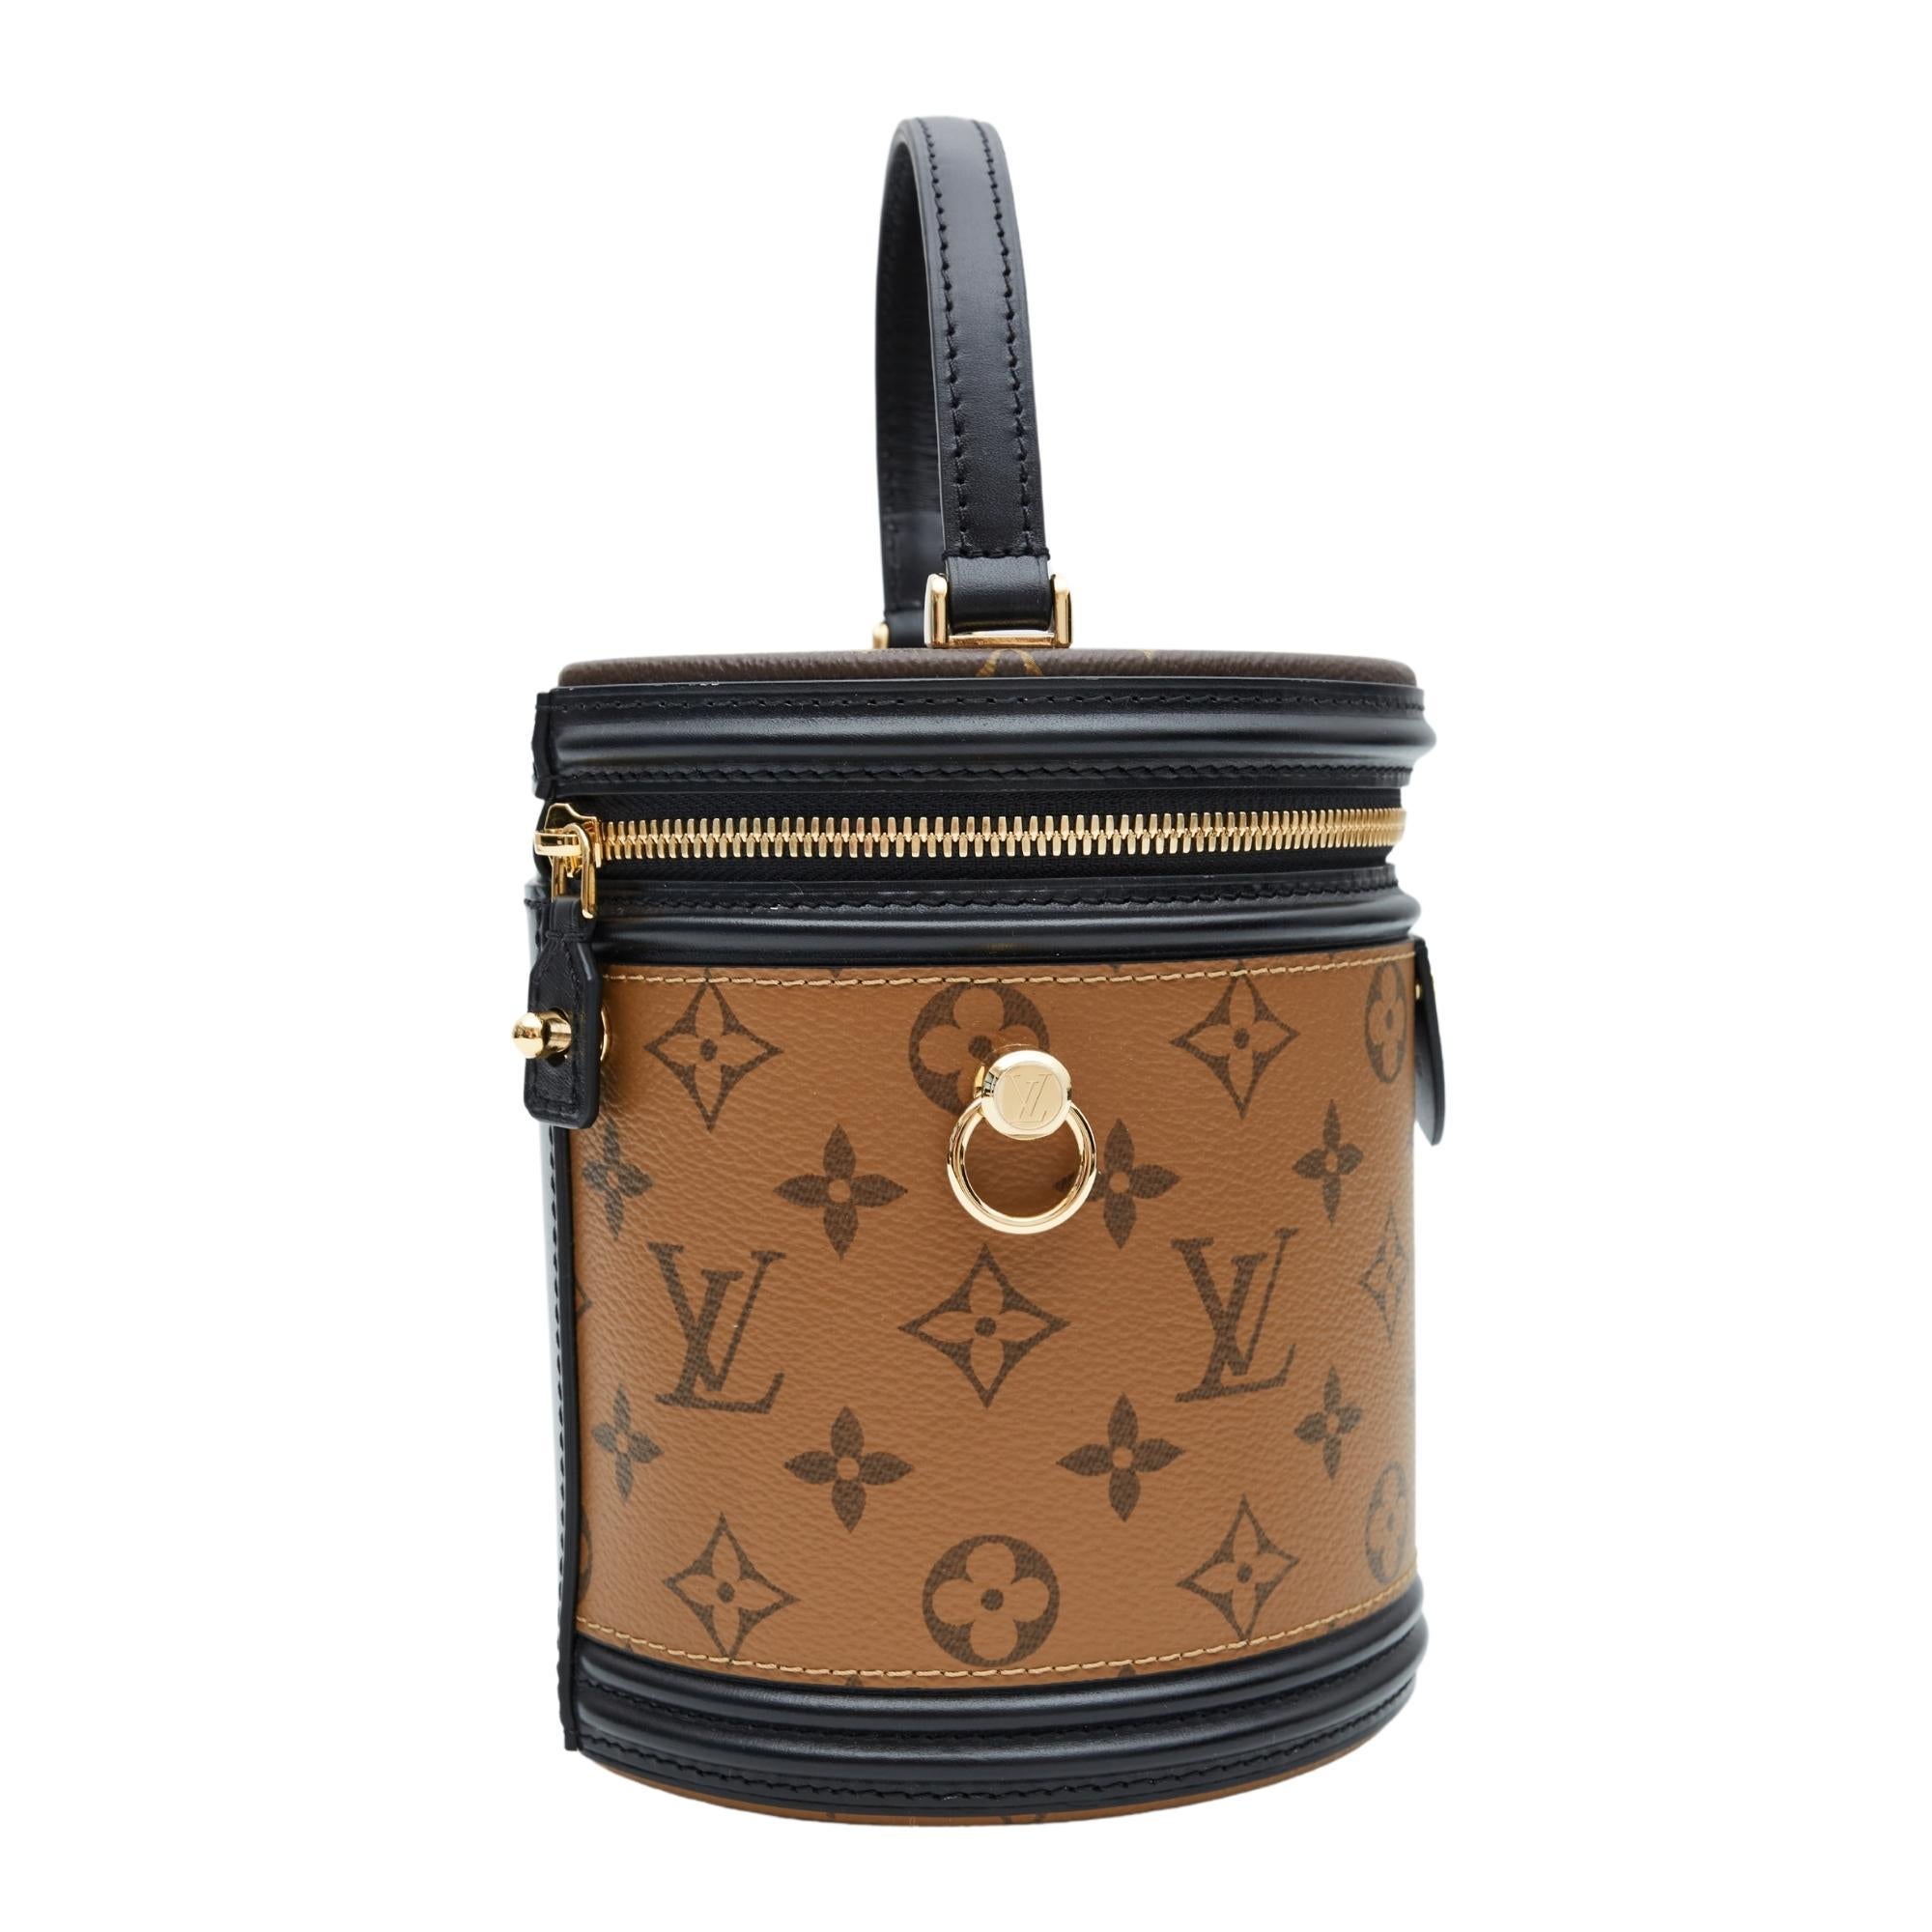 Louis Vuitton Monogram Reverse Cannes Mm Bag (2020) In Excellent Condition For Sale In Montreal, Quebec